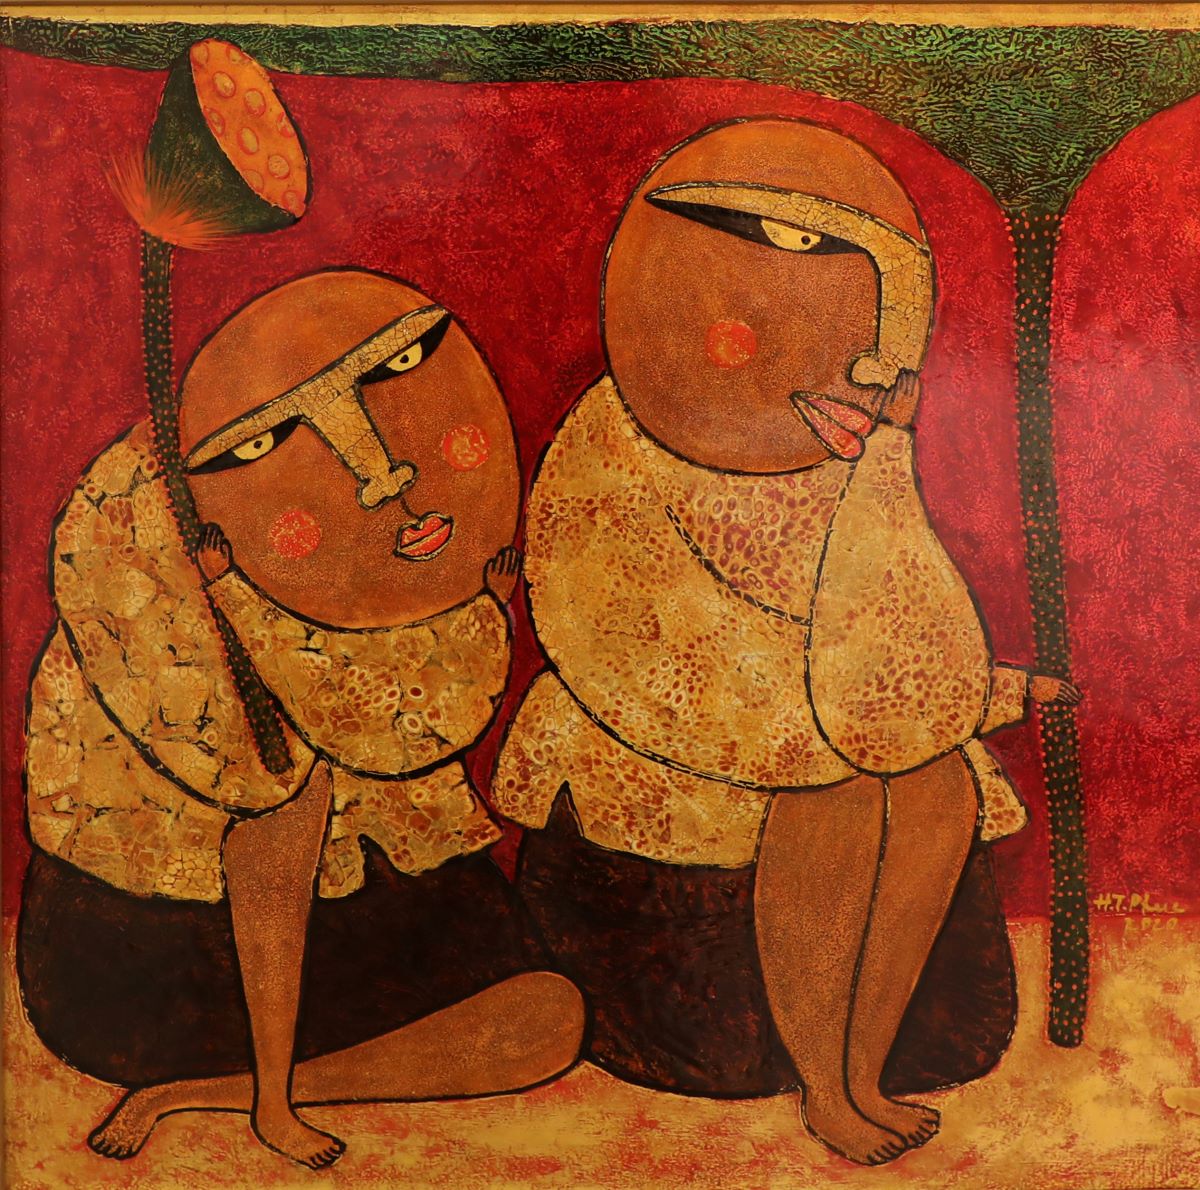 Rhymes I - Vietnam Lacquer Paintings by Artist HT Phuc